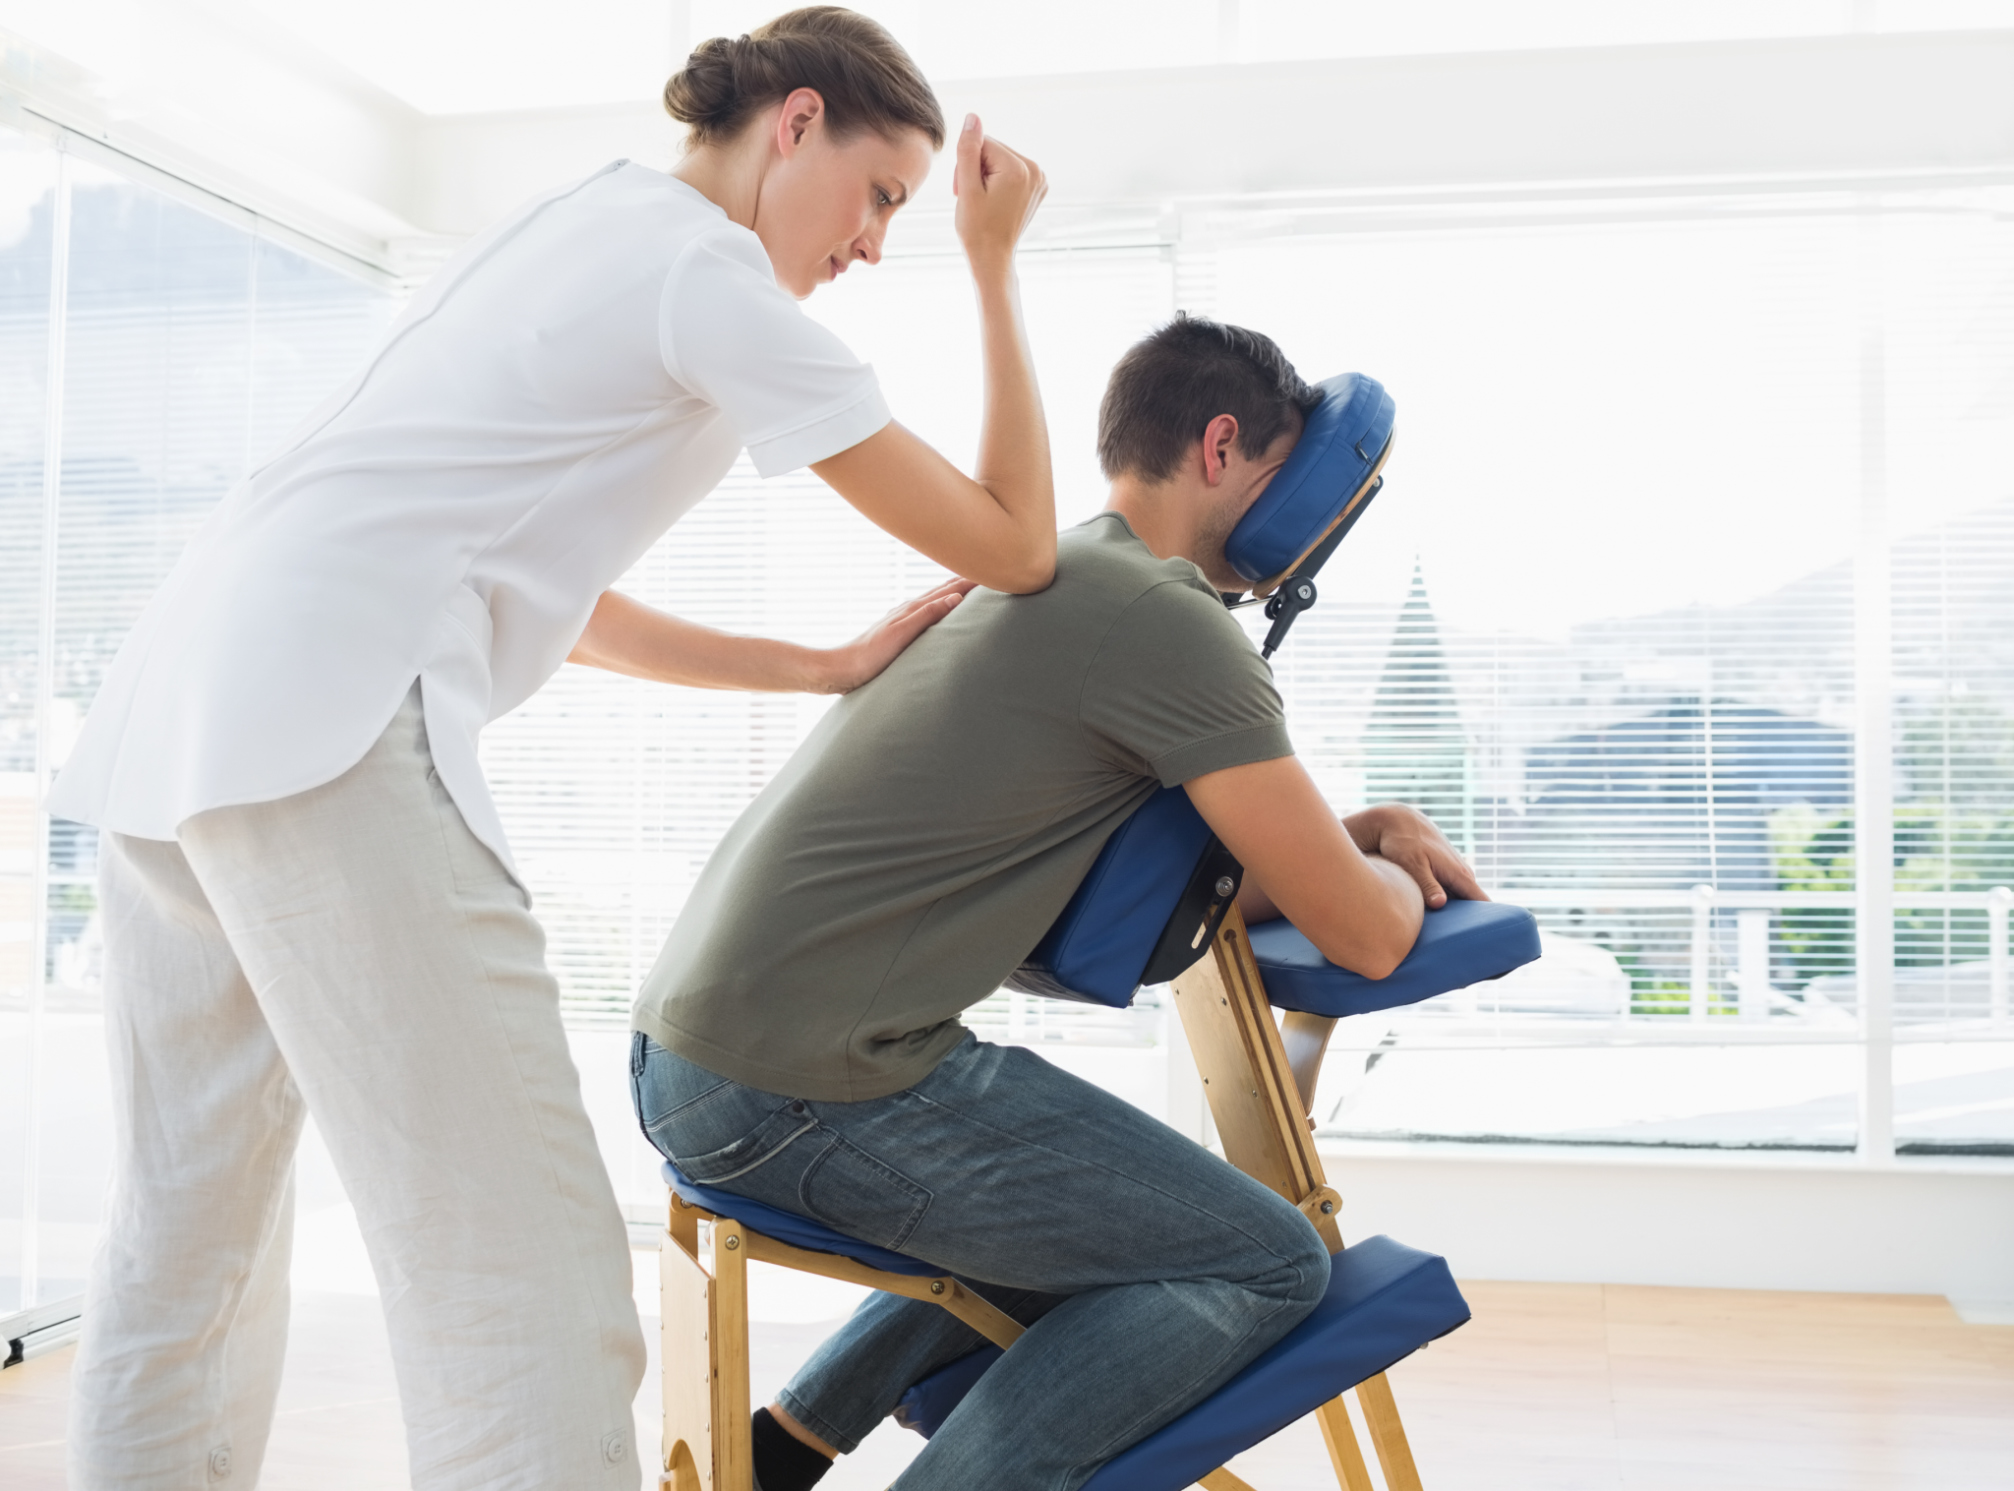 From Chair to Table: Convert Your Chair Massage Clients